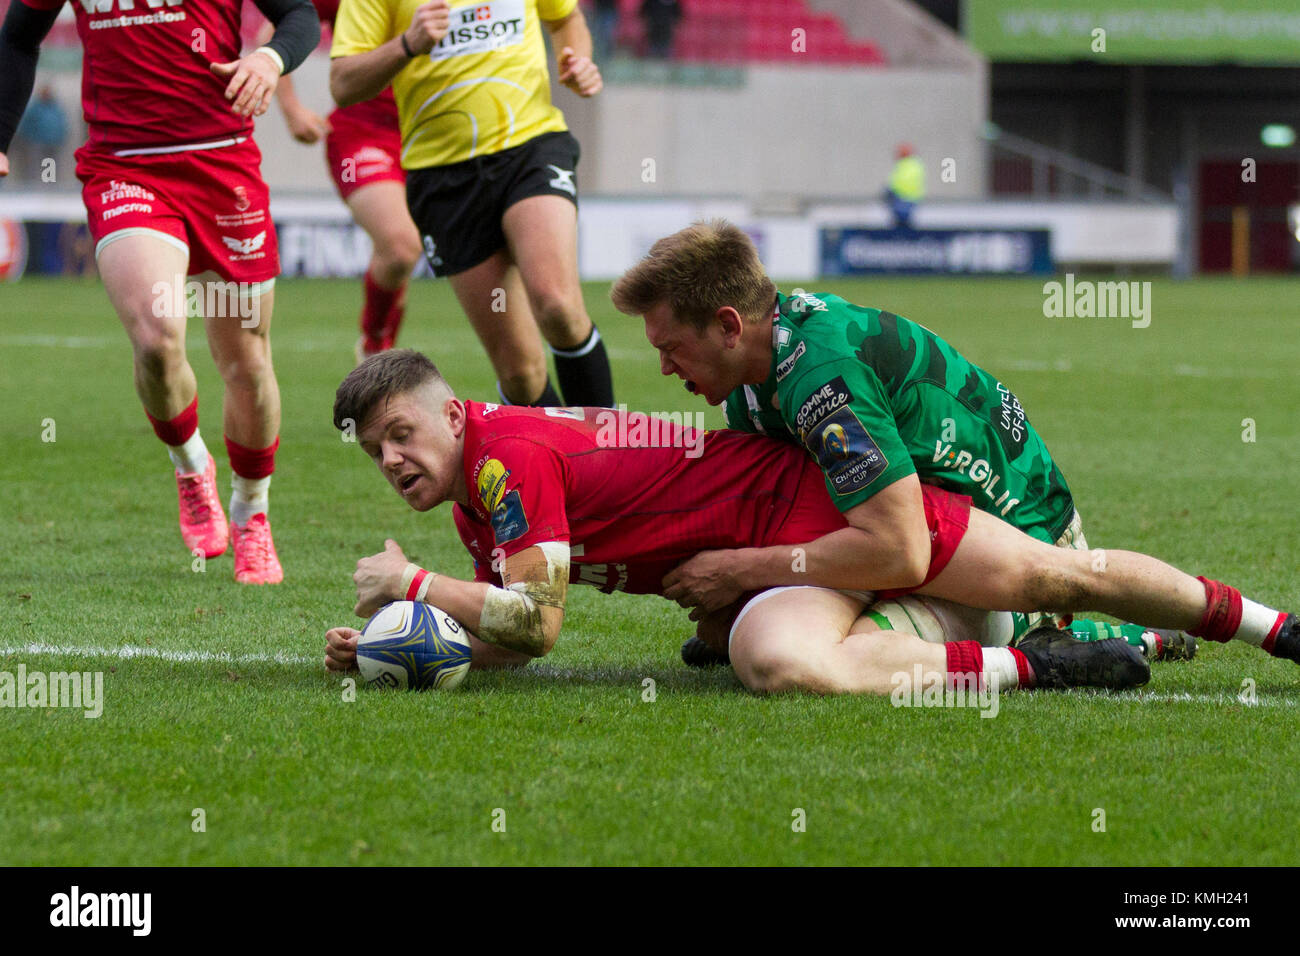 Steff Evans scores a try for the Scarlets against Benetton Rugby the European Rugby Champions Cup. Stock Photo